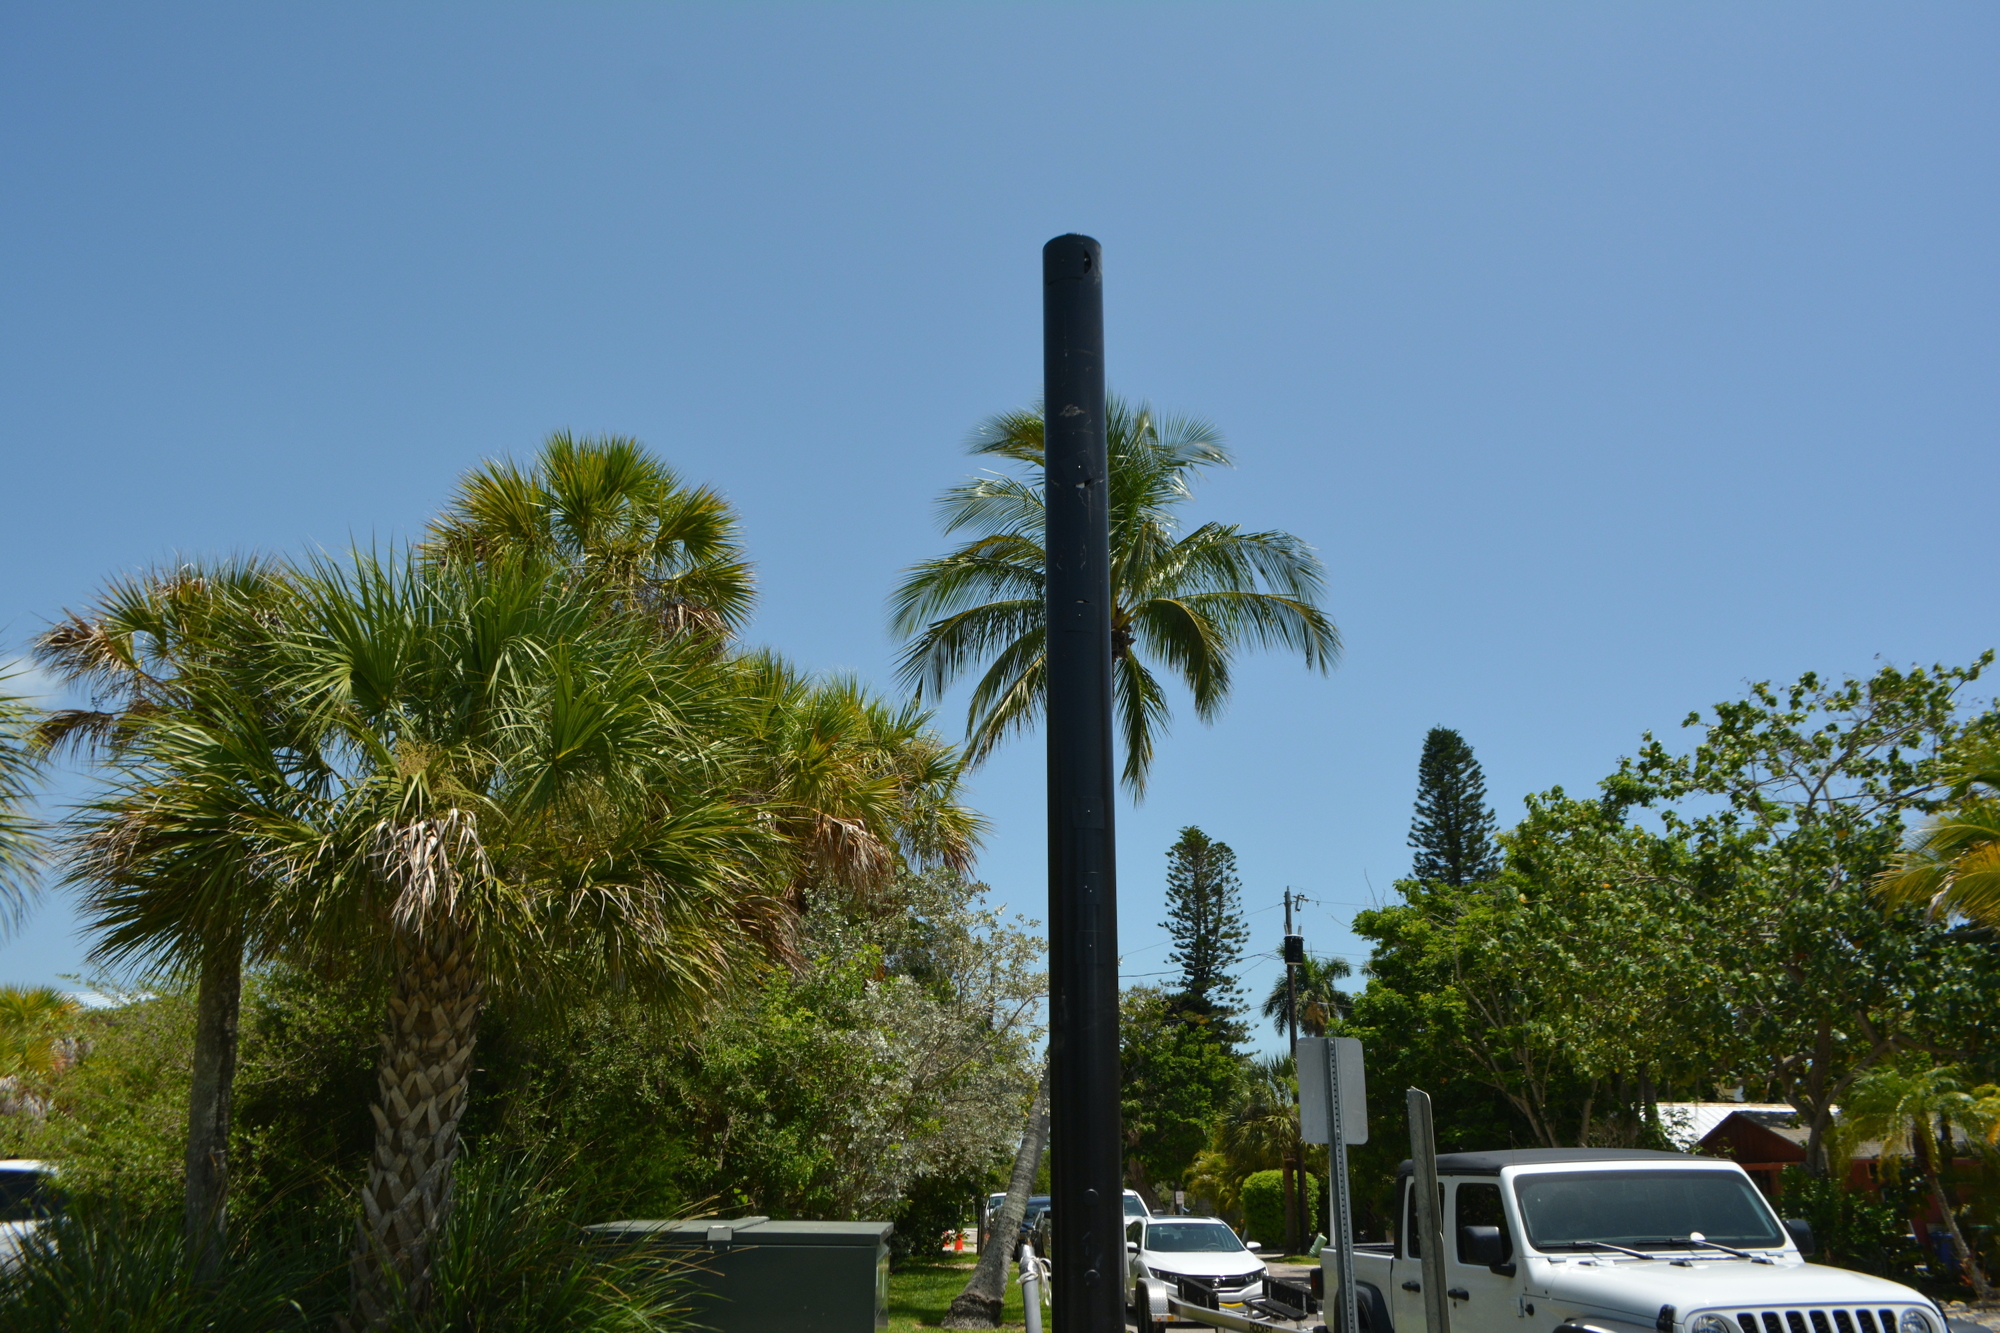 A 25-foot cell tower was erected in Longboat Beach Village on the corner of Broadway Street and Lois Drive. (Photo by Lauren Tronstad)